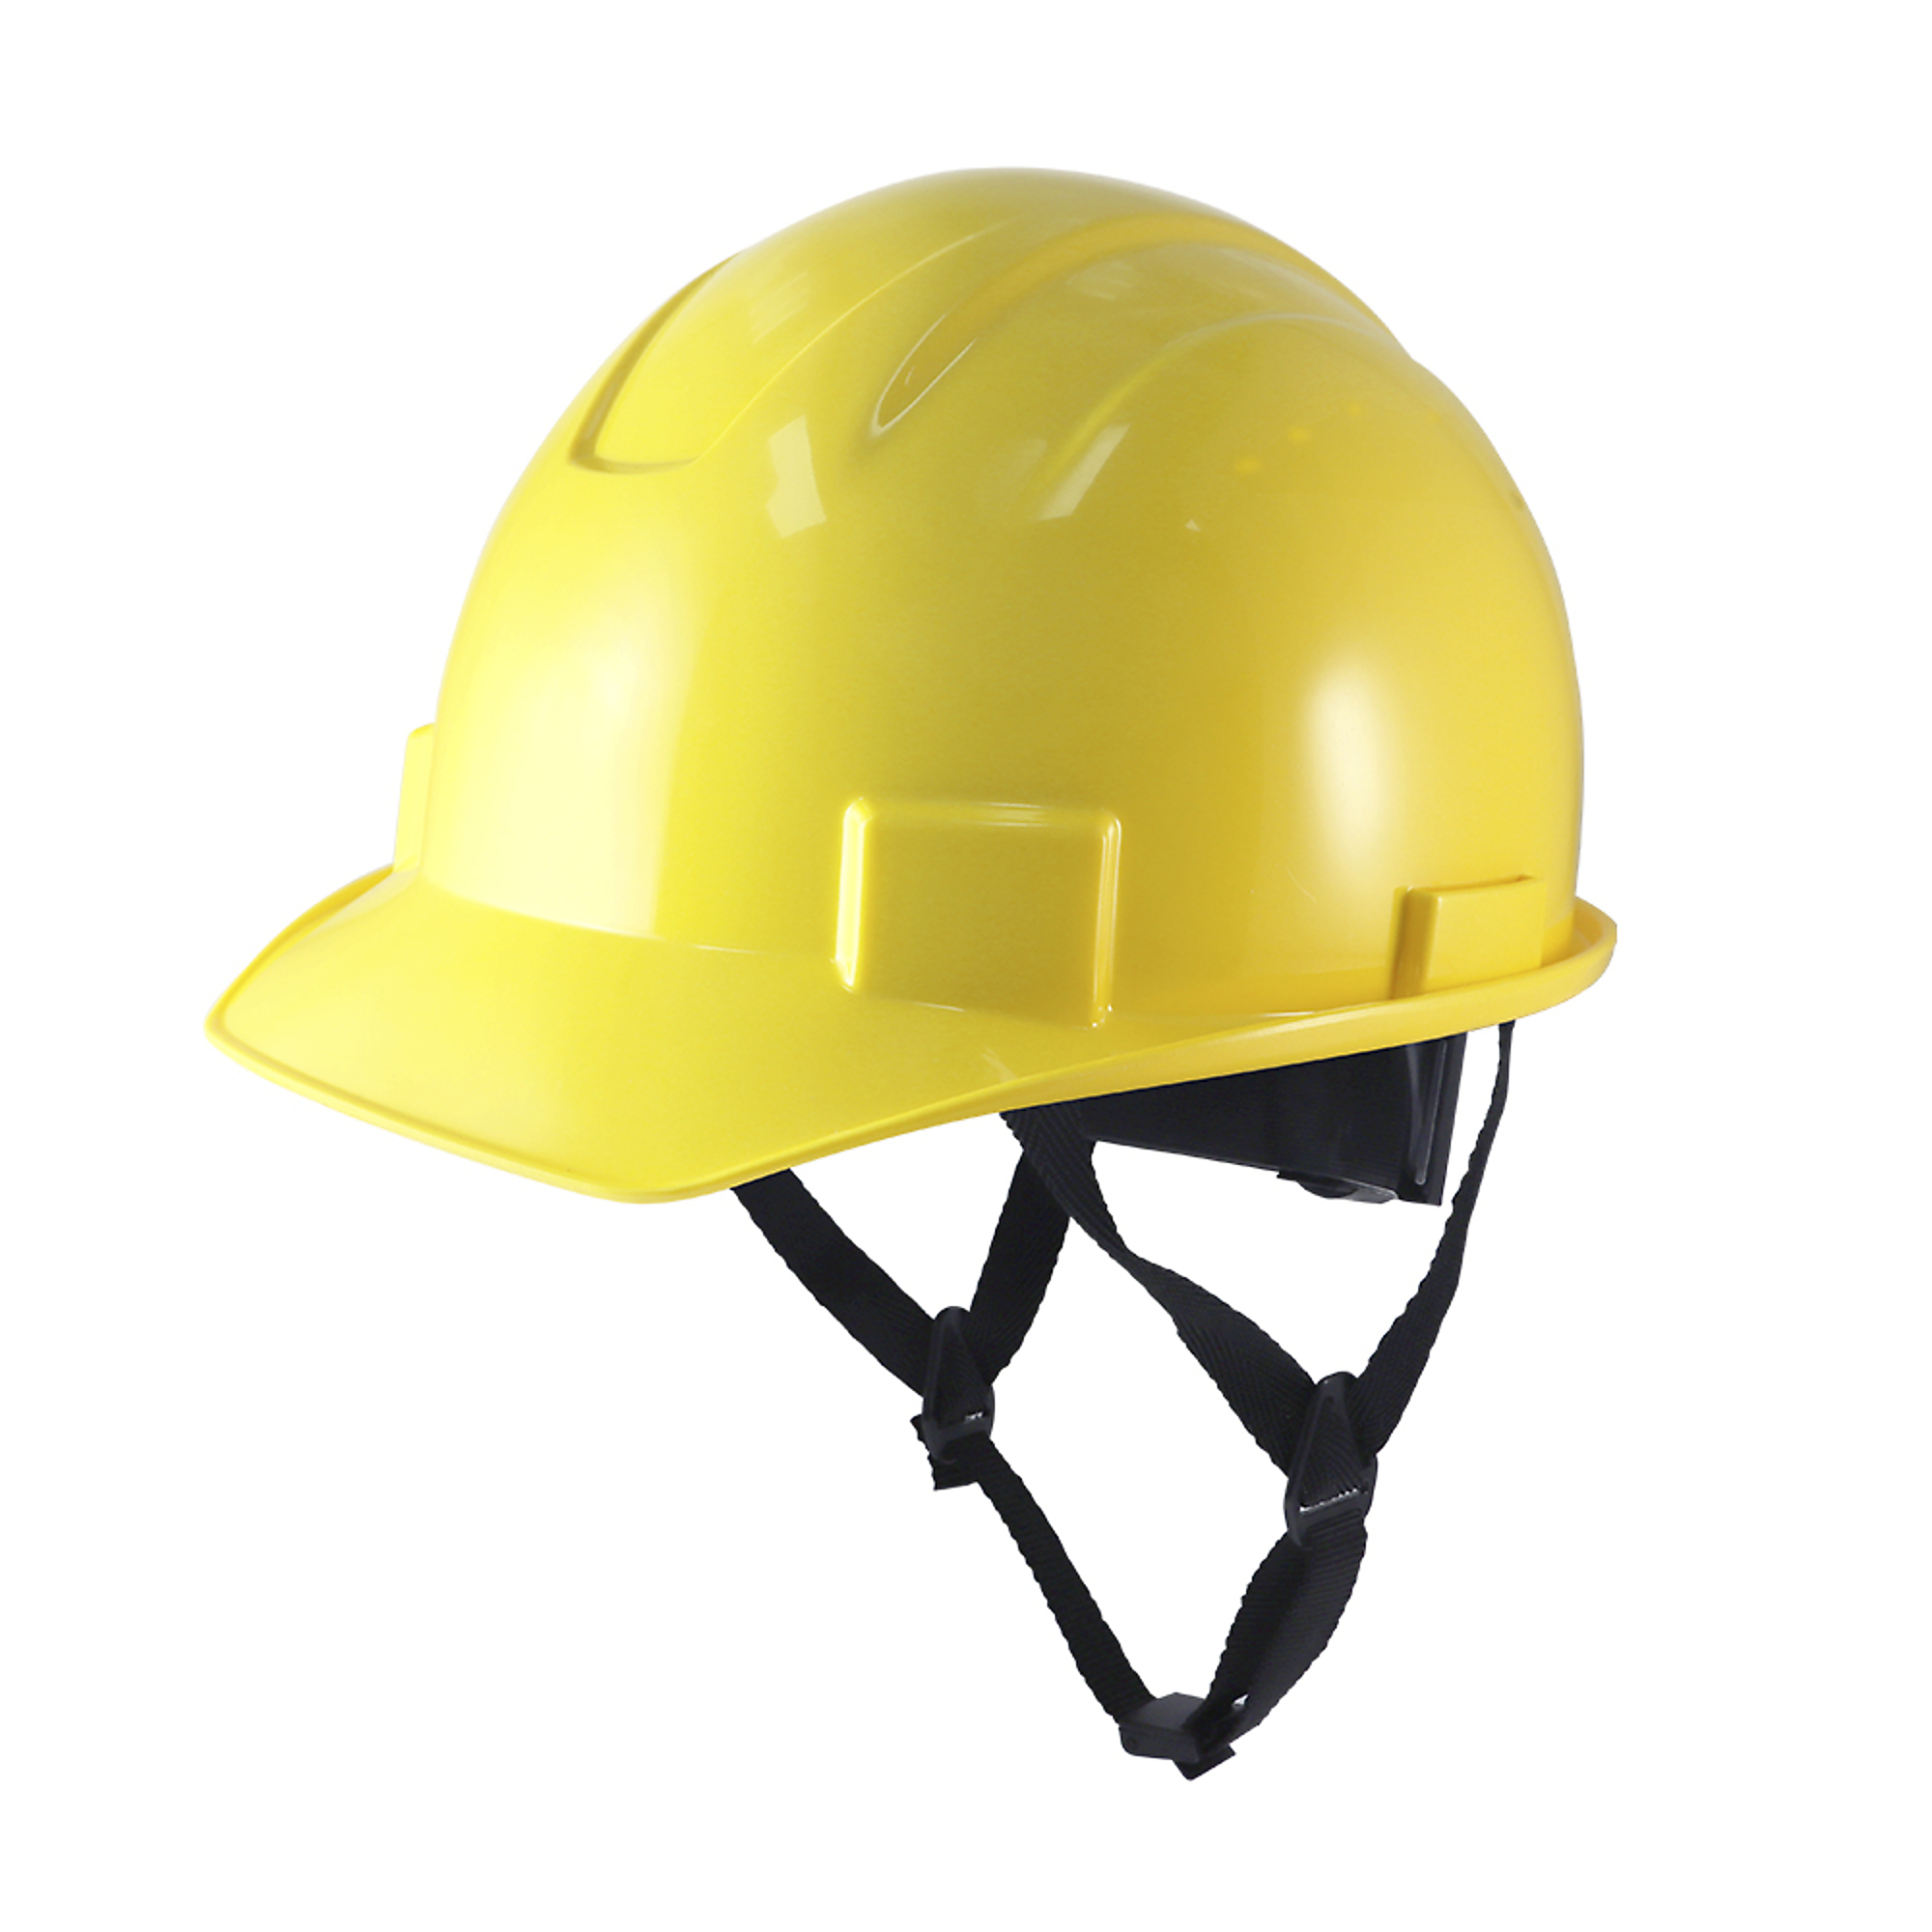 General Electric, Safety Helmet- Non-Vented- Yellow, Hard Hat Style Helmet, Hat Size One Size, Color Yellow, Model GH327Y